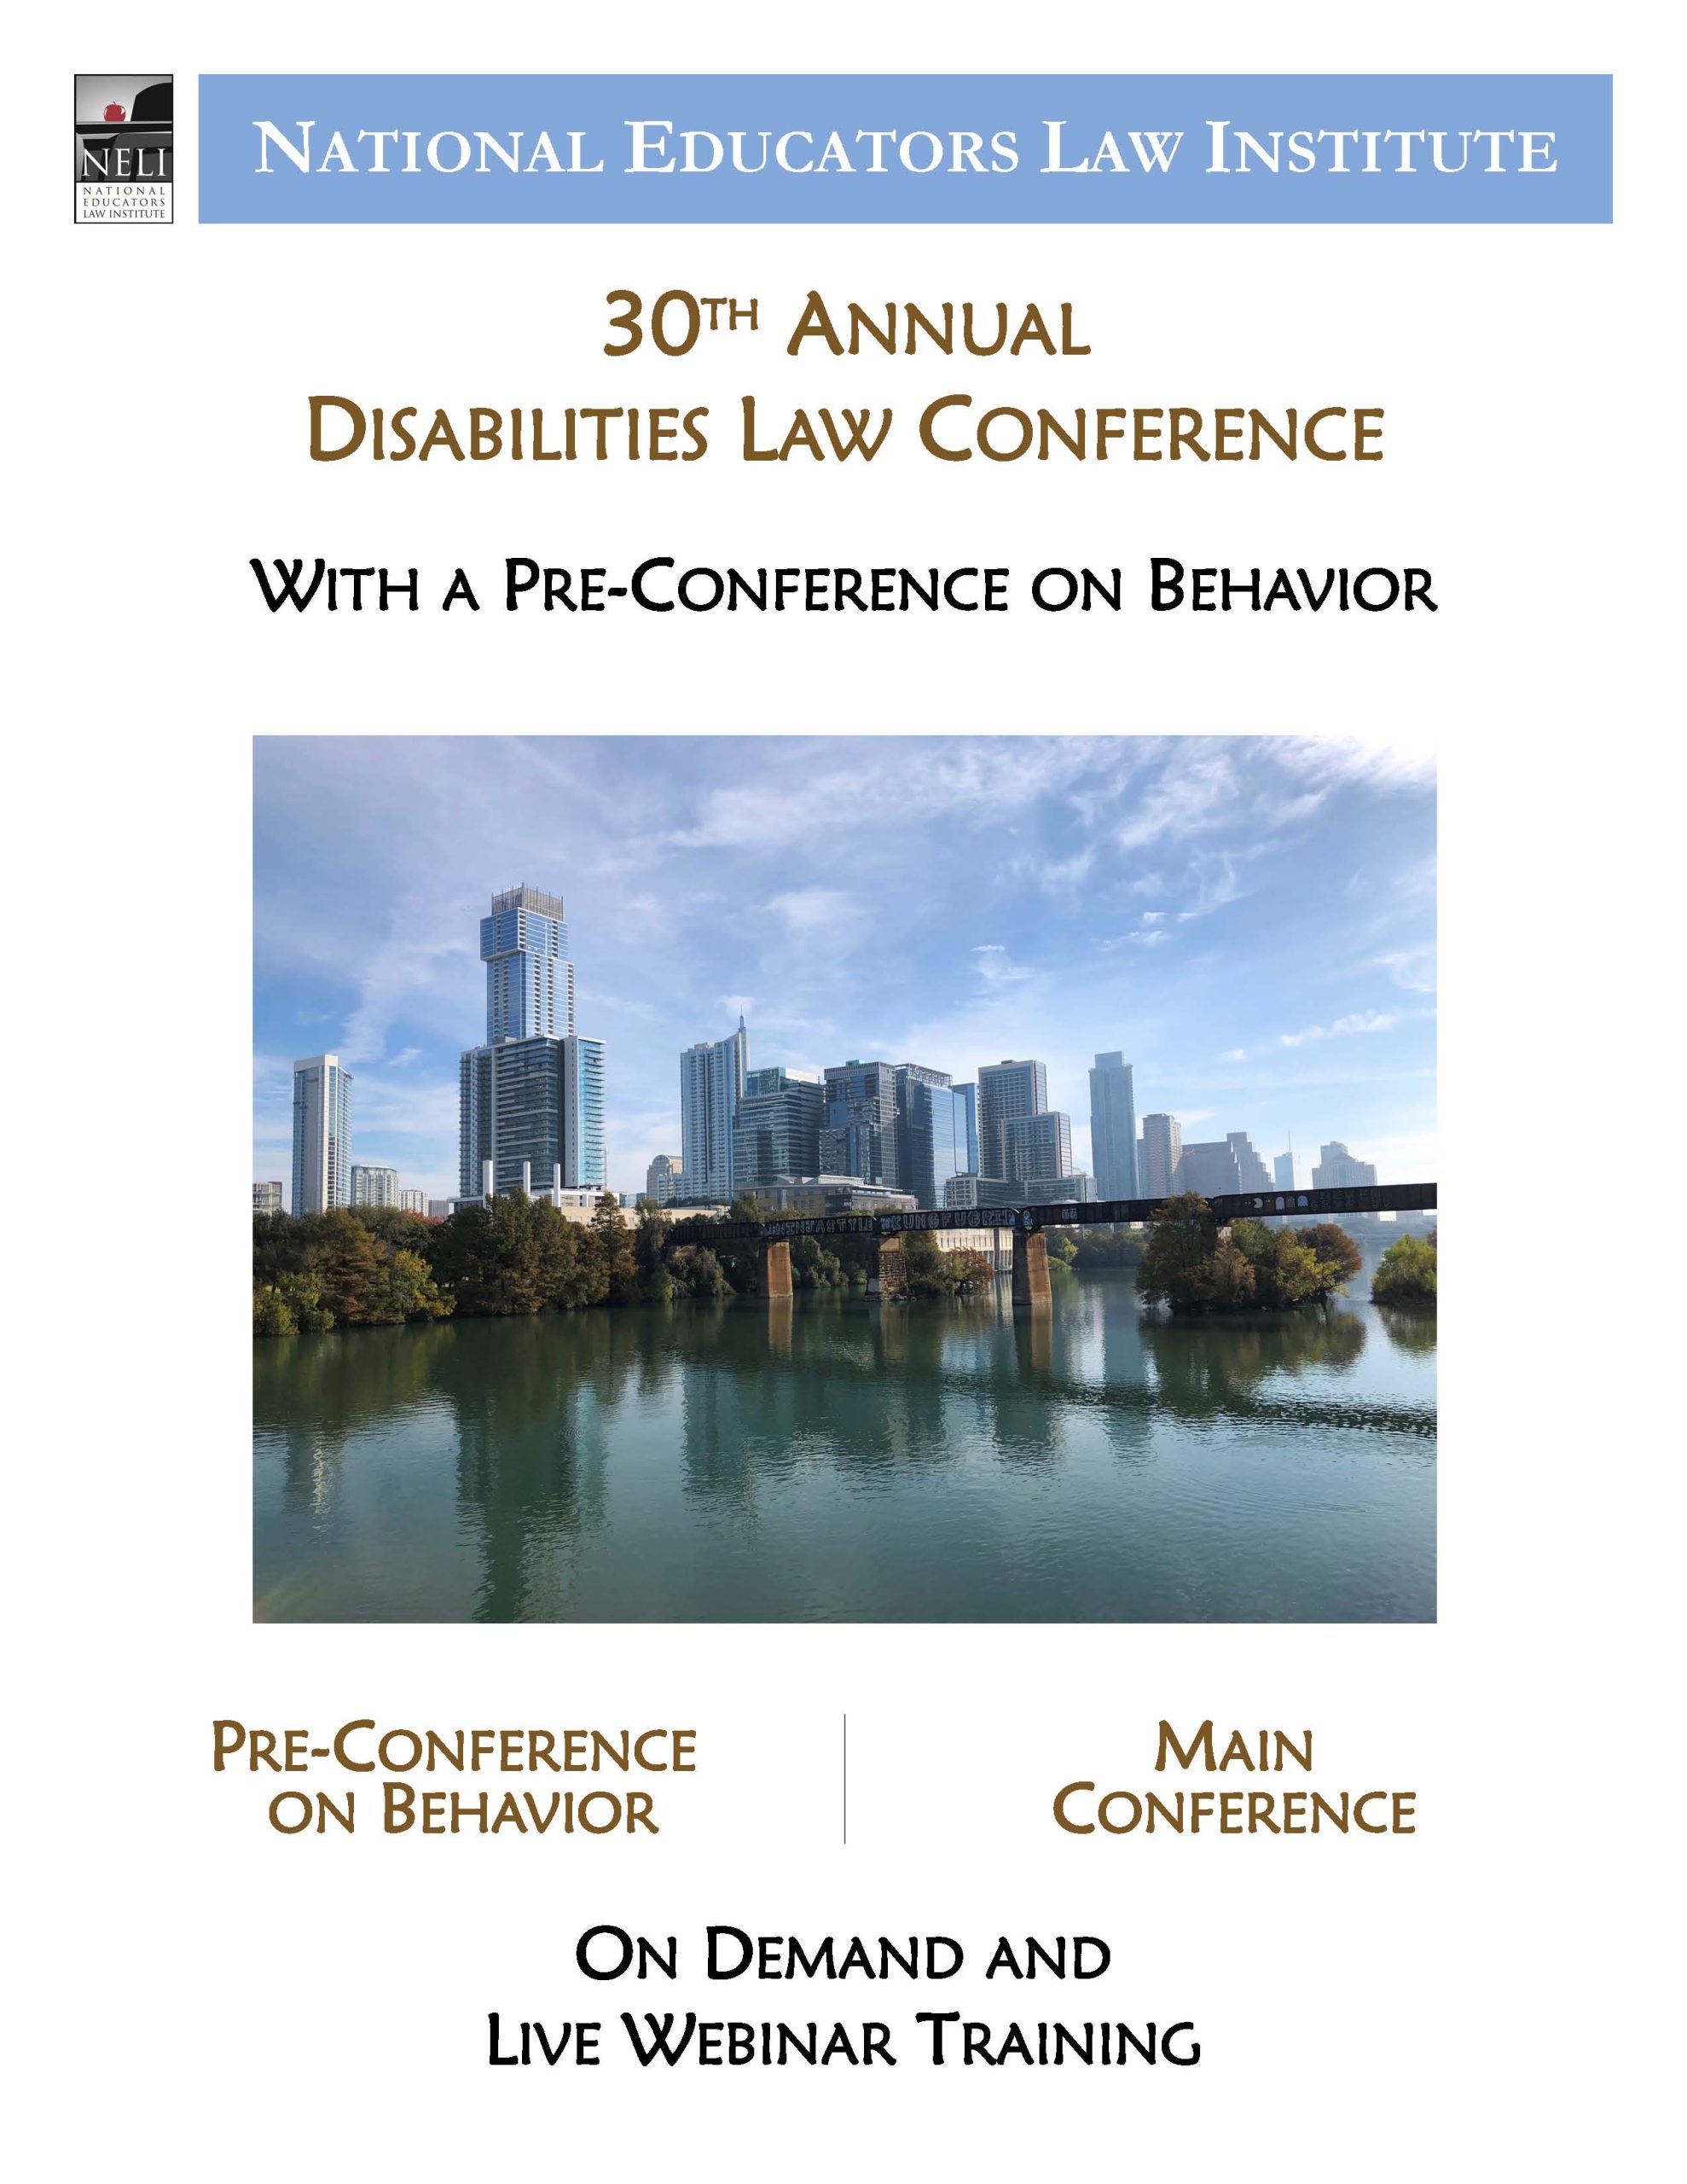 30th Annual Disabilities Law Conference - Main Conference